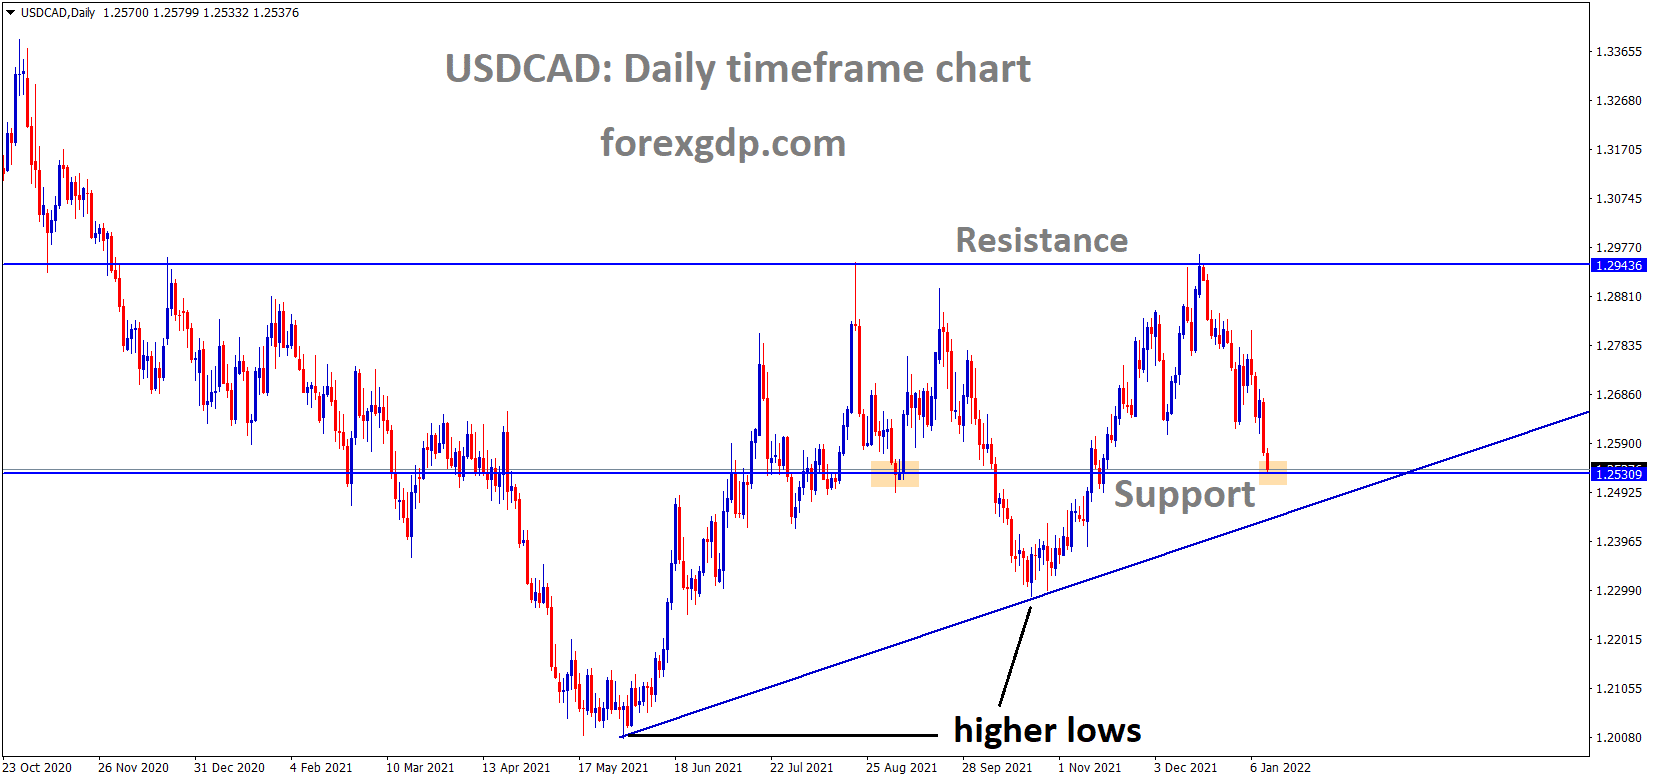 USDCAD is moving in an ascending triangle pattern and the market has reached the horizontal support area of the pattern